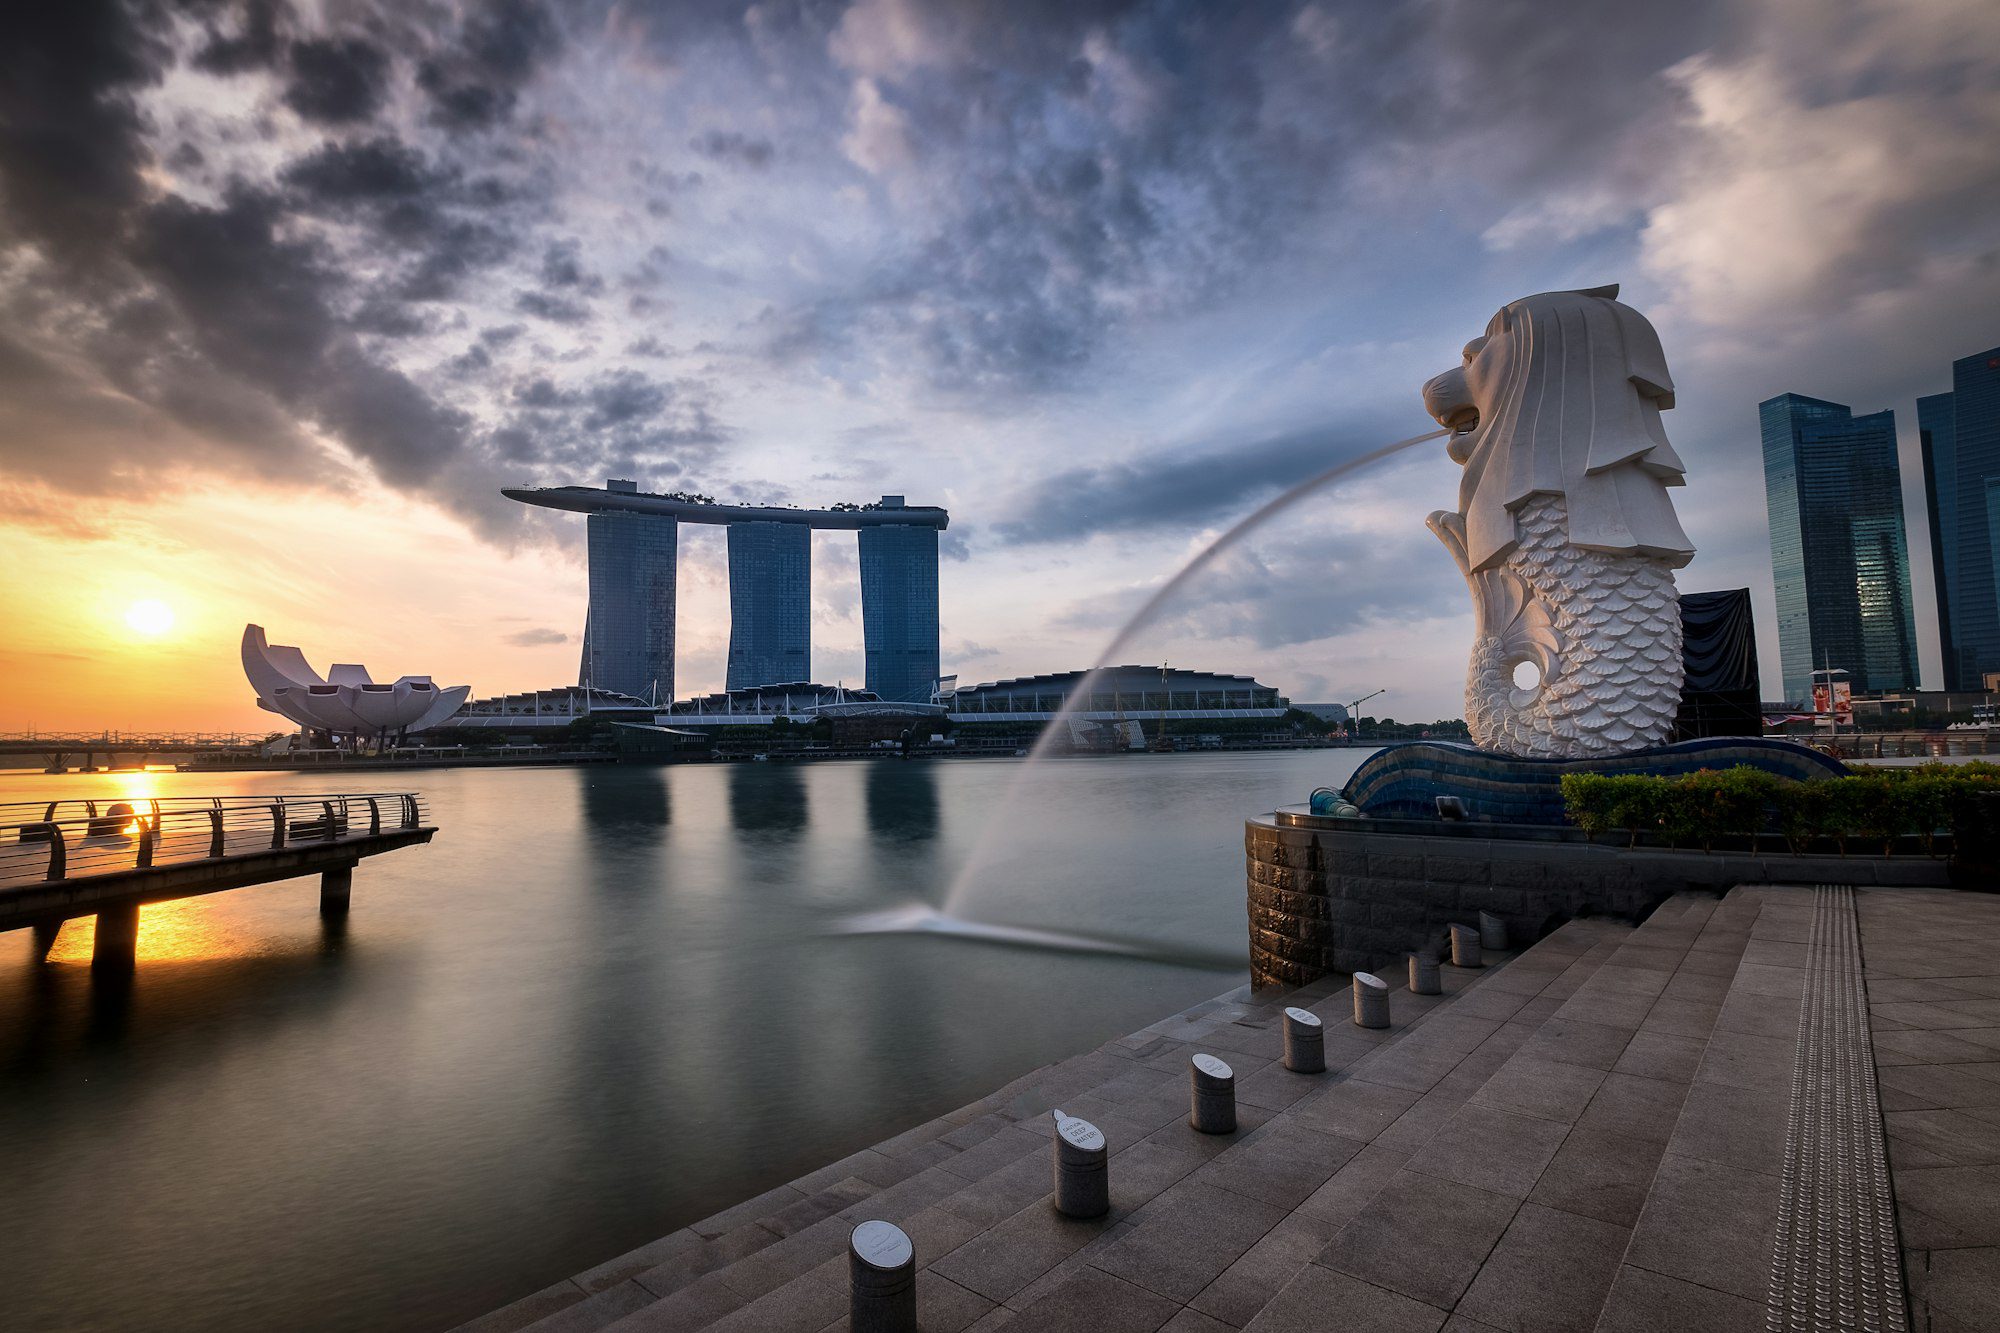 Merlion looks over the Bay at sunrise